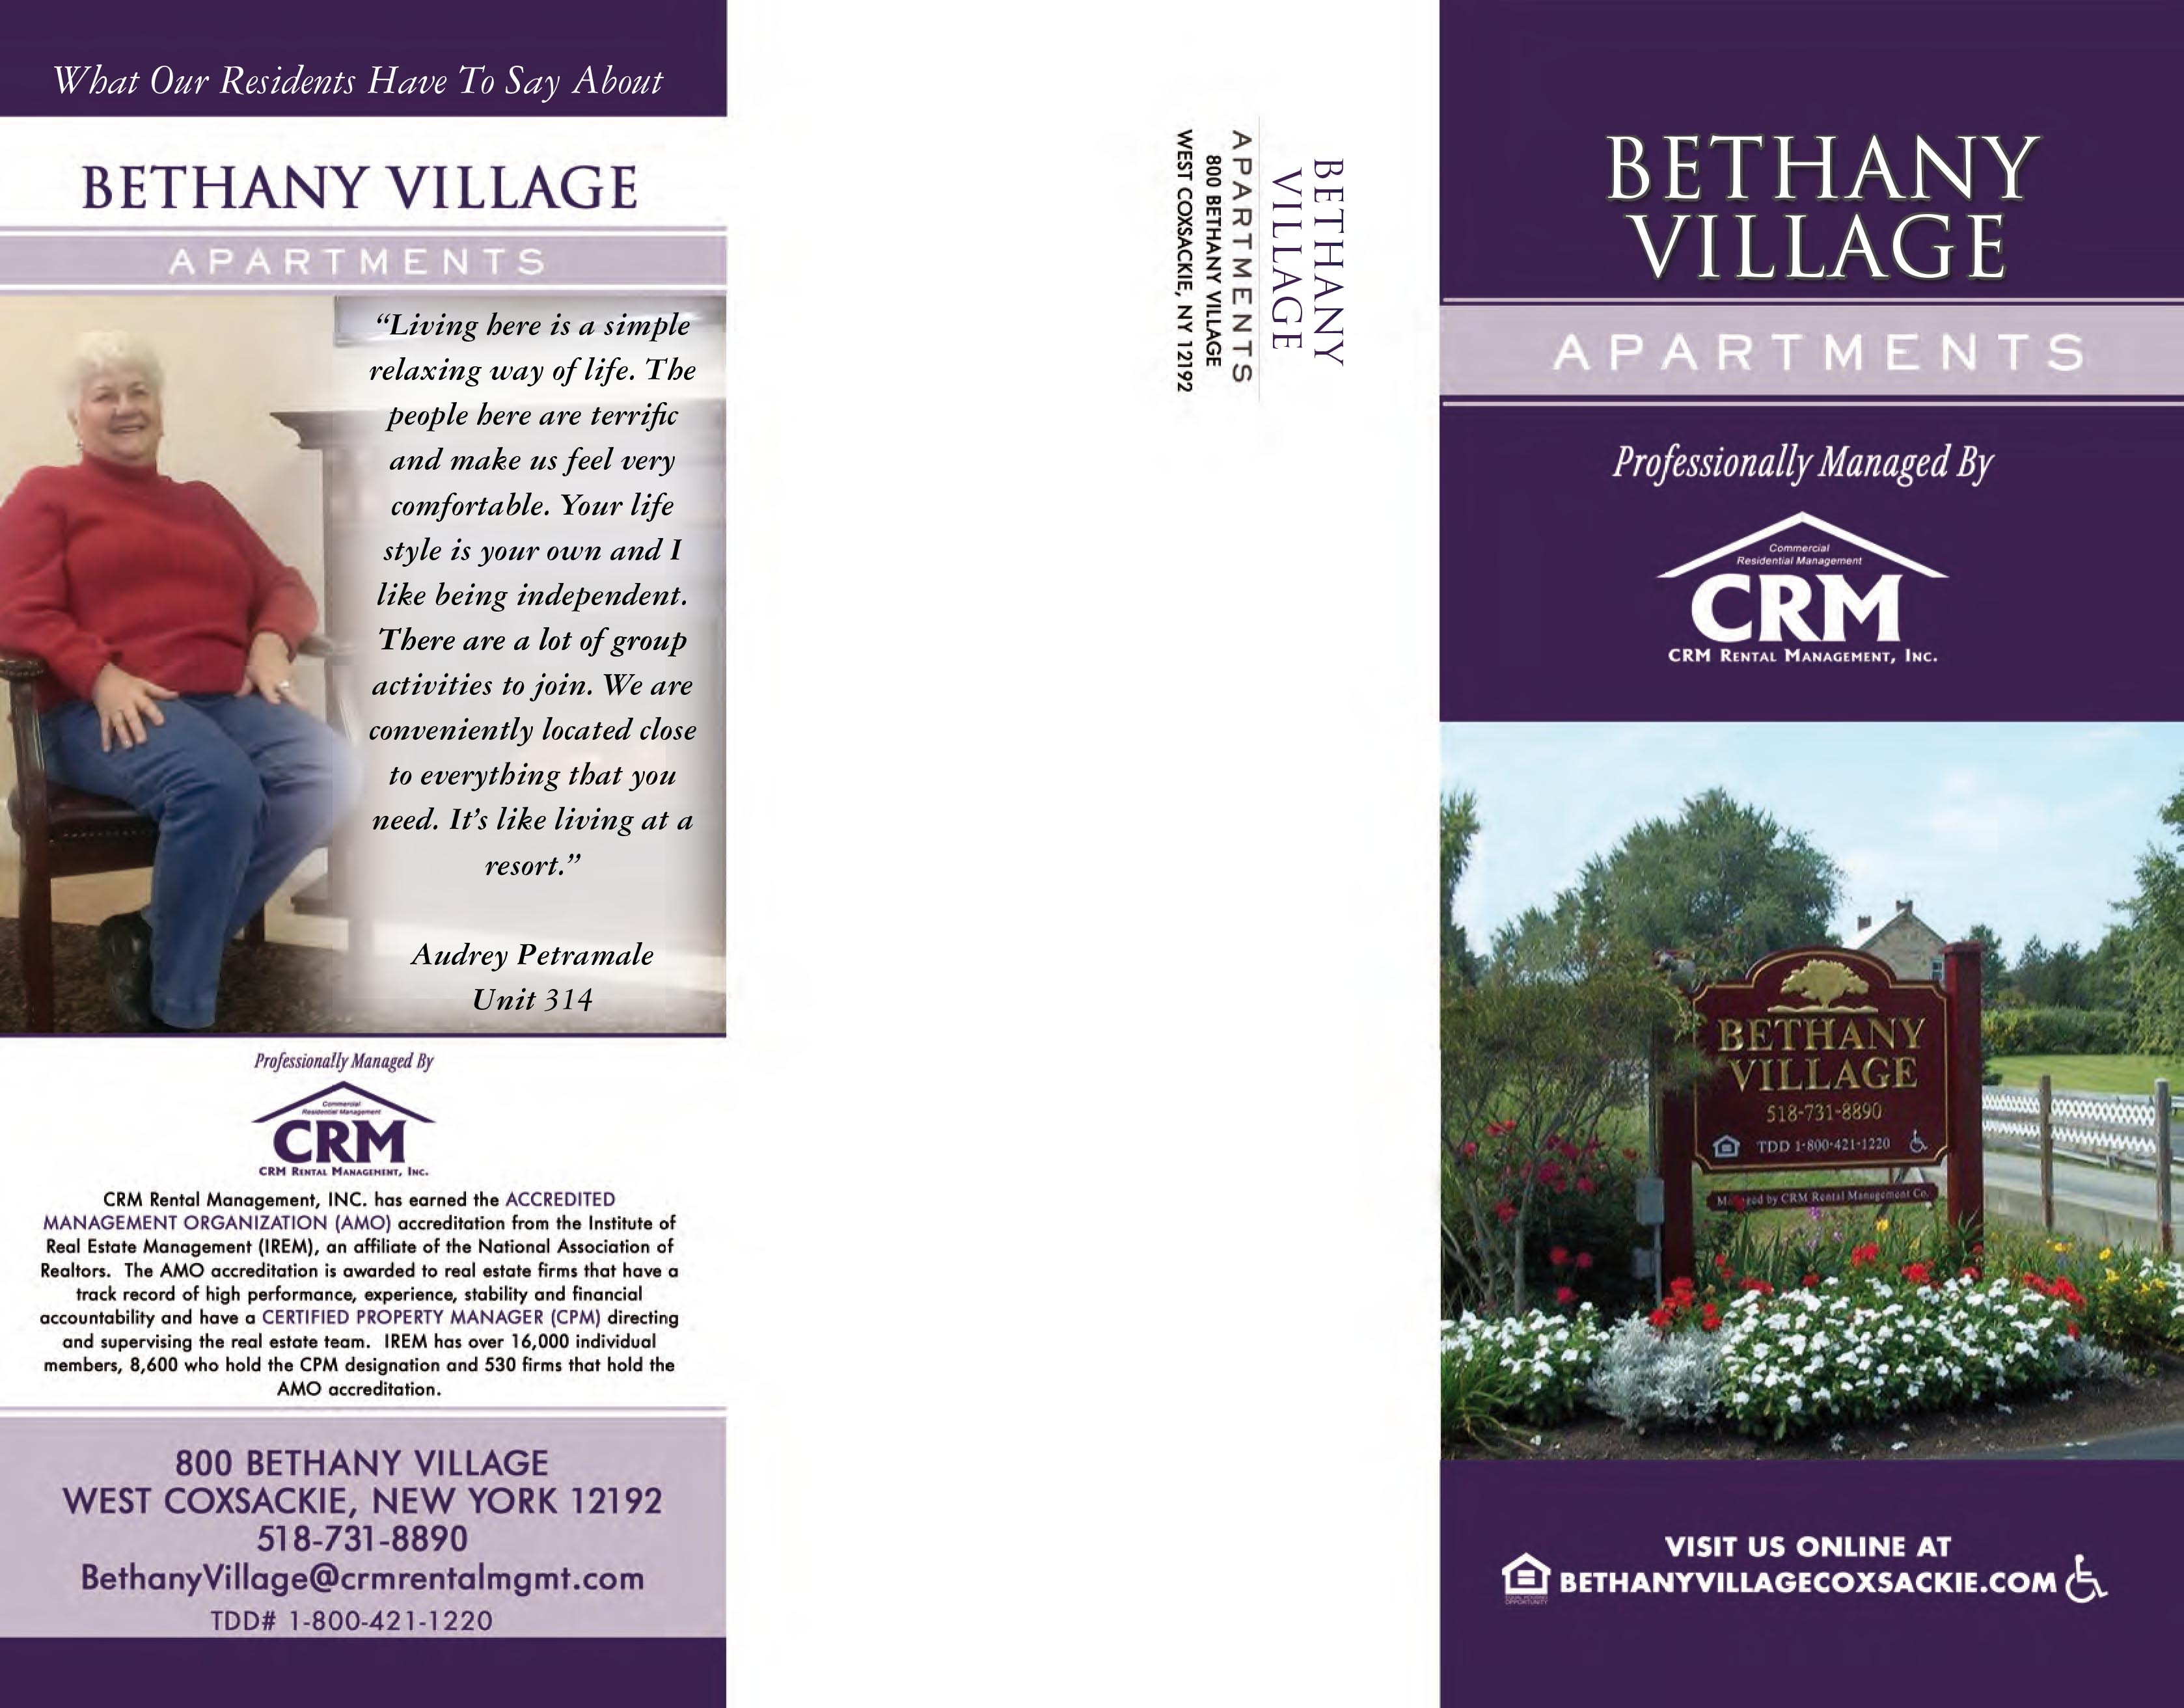 Bethany Village Brochure Page 1 of 2